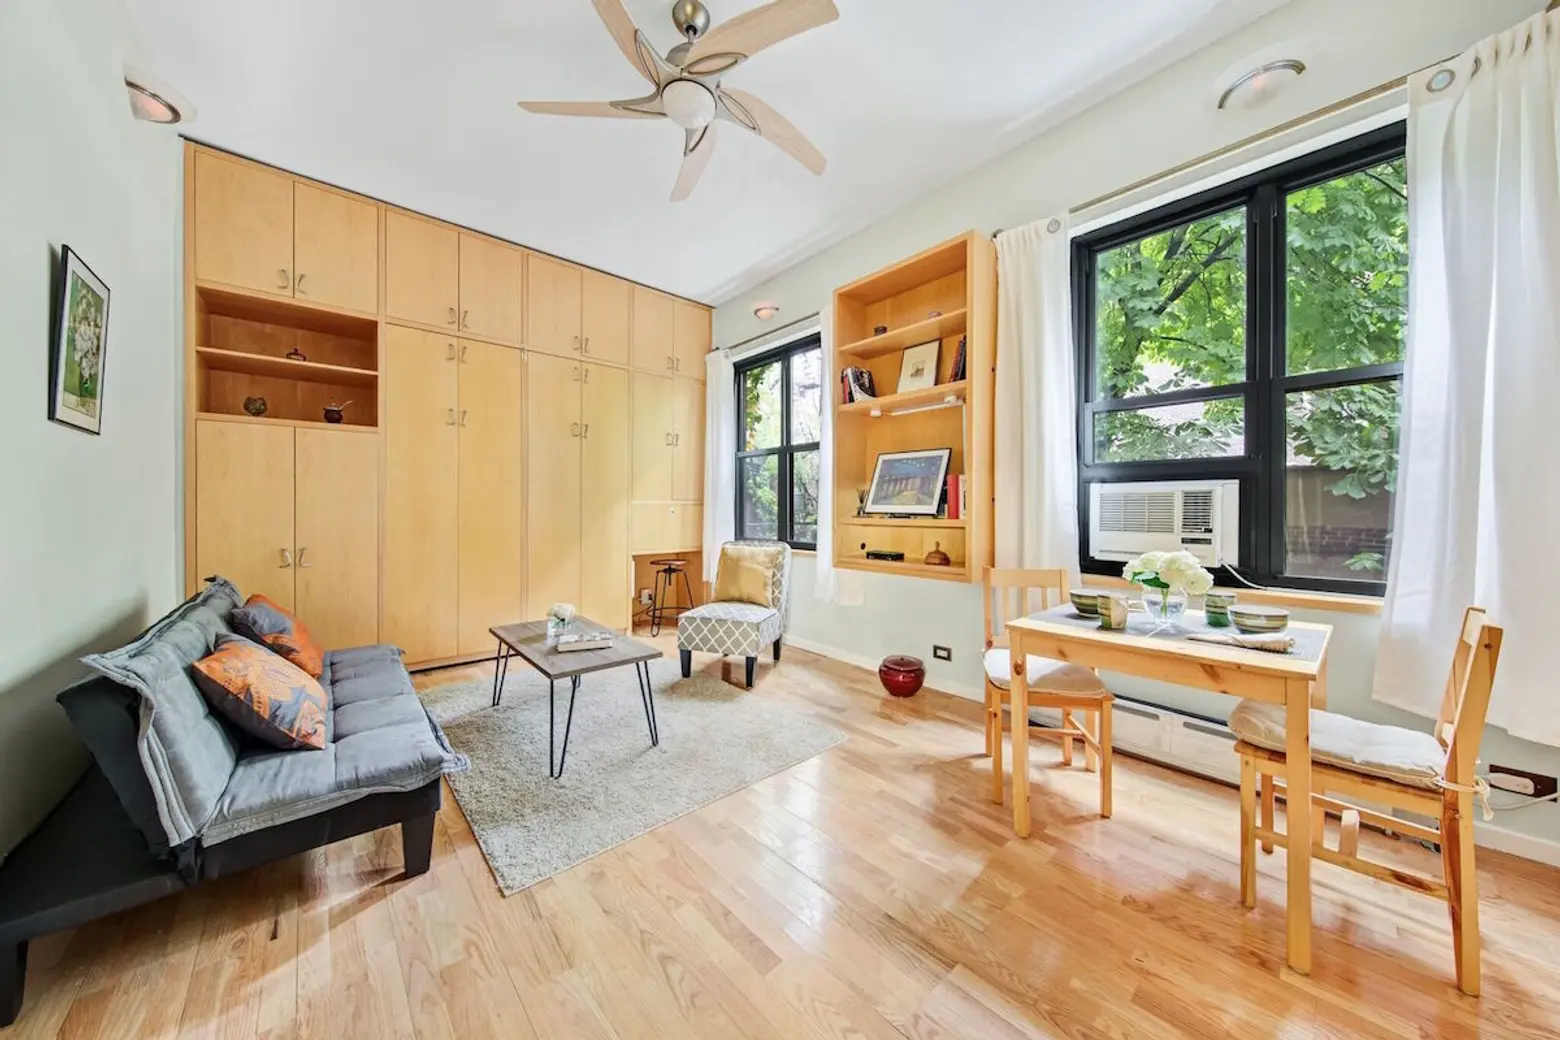 Clever use of space is key in this fully customized $450K Gramercy studio